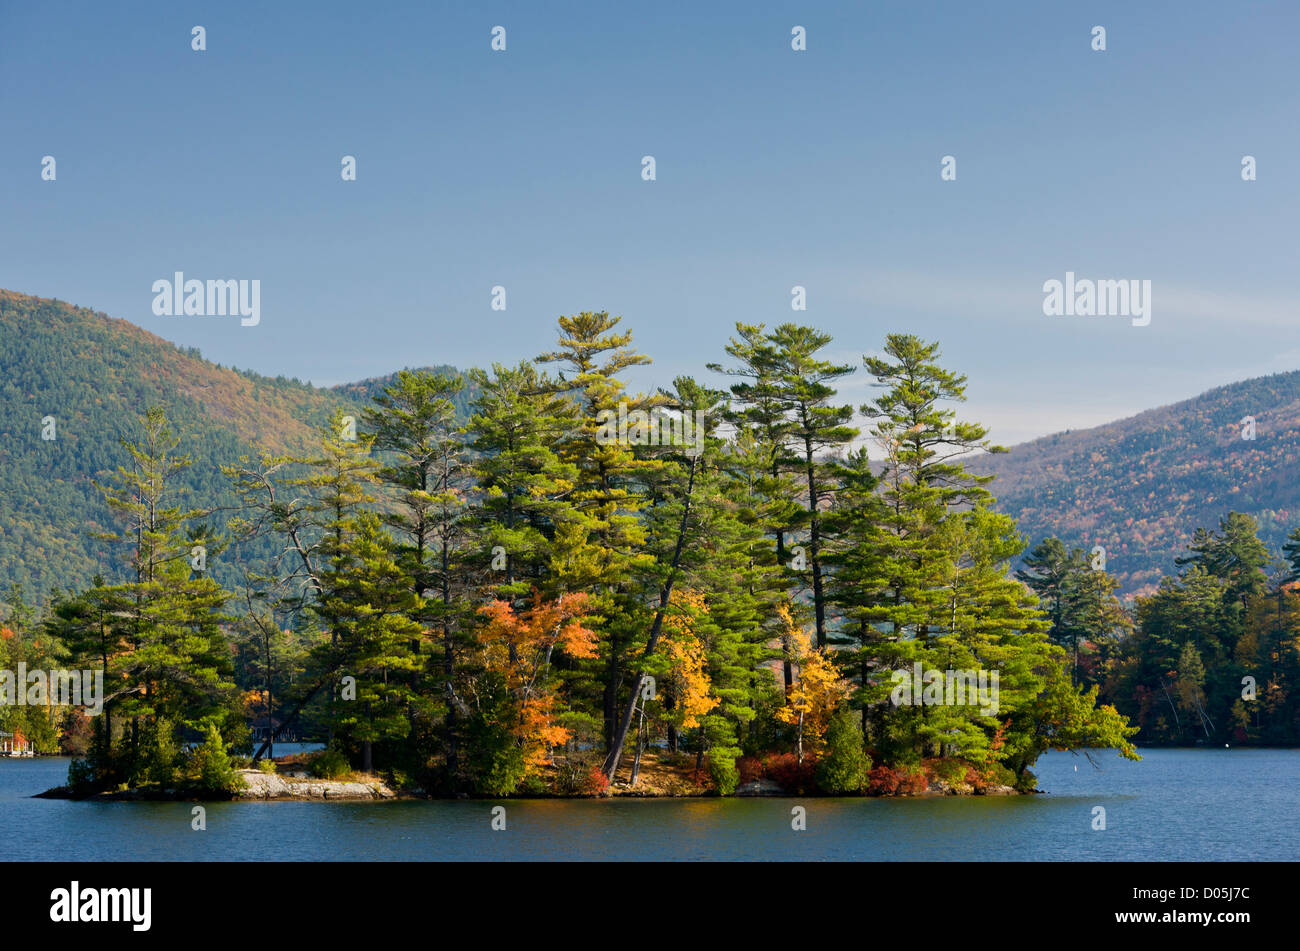 Autumn island with pines and maples, in Lake George, fall, Adirondack Mountains, New York State, USA Stock Photo